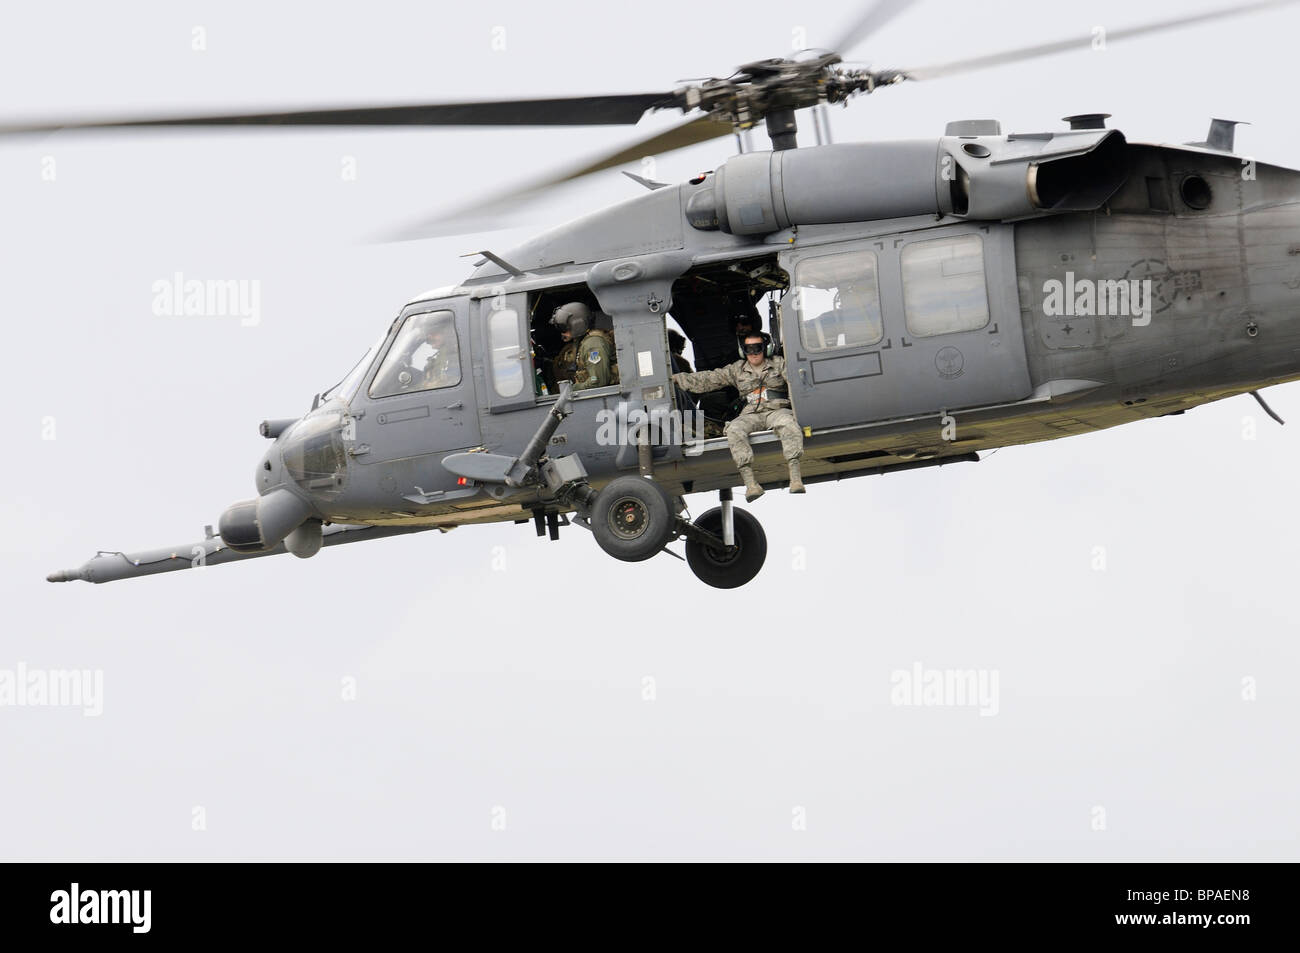 United States Air Force Sikorsky HH-60G Pave Hawk LN26208 arrive au 2010 RIAT Royal International Air Tattoo Banque D'Images